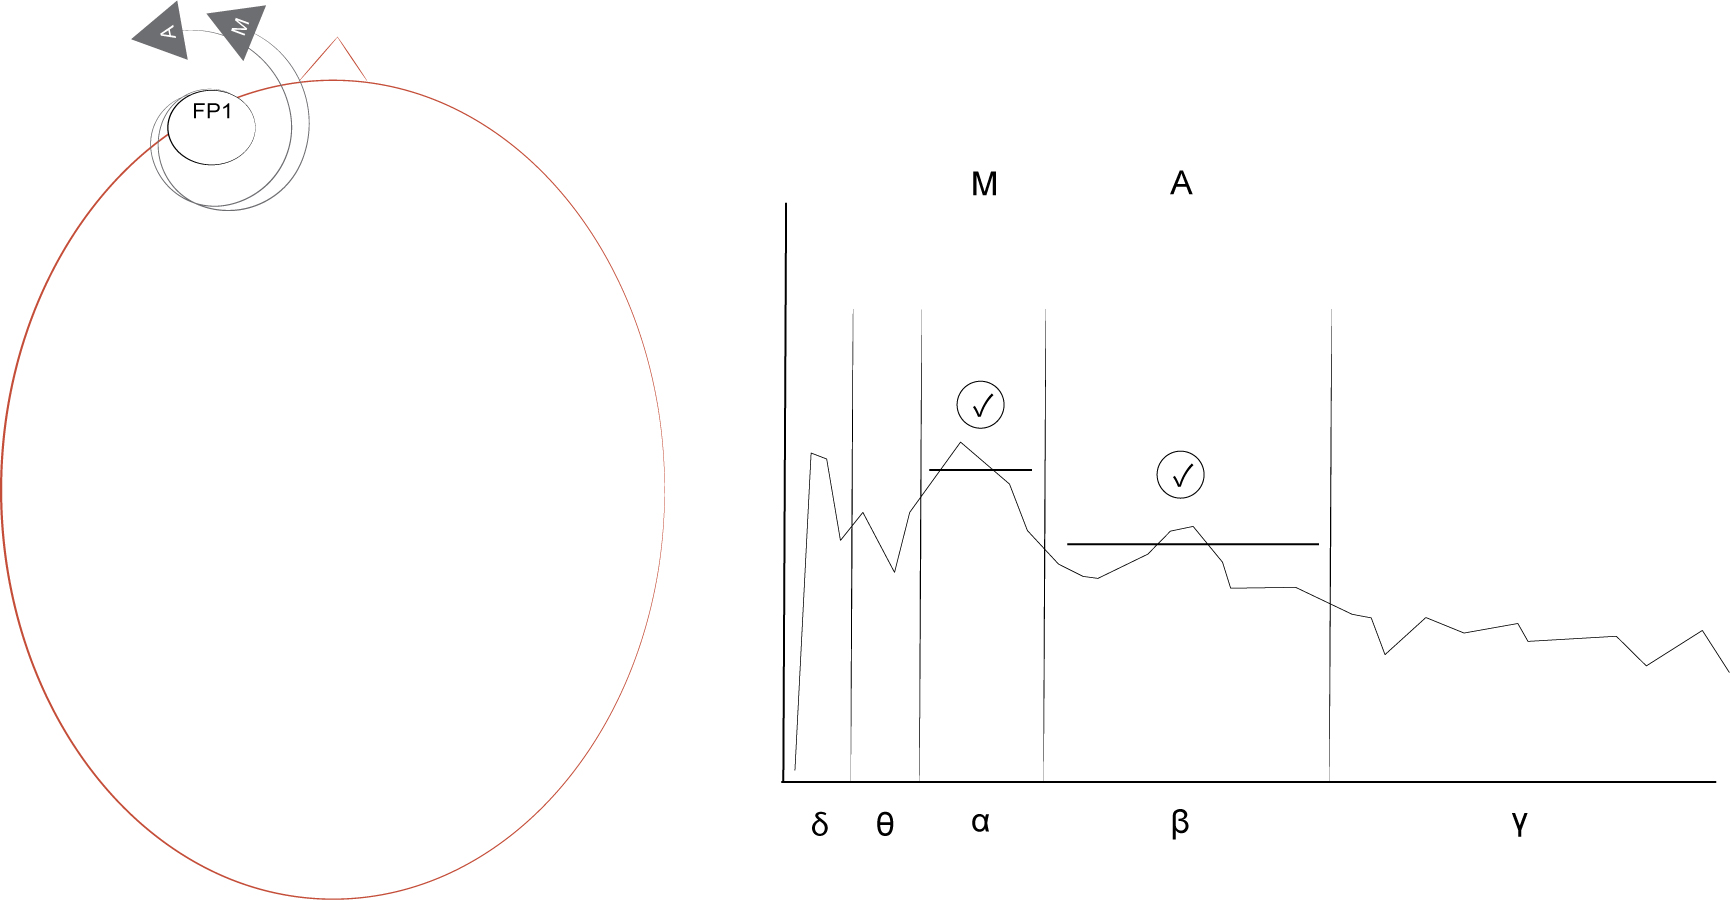 BCMI-1 neurofeedback protocol with electrode location (left) and a spectral plot (right) indicating the application of two neurofeedback indicators on the eSenses.